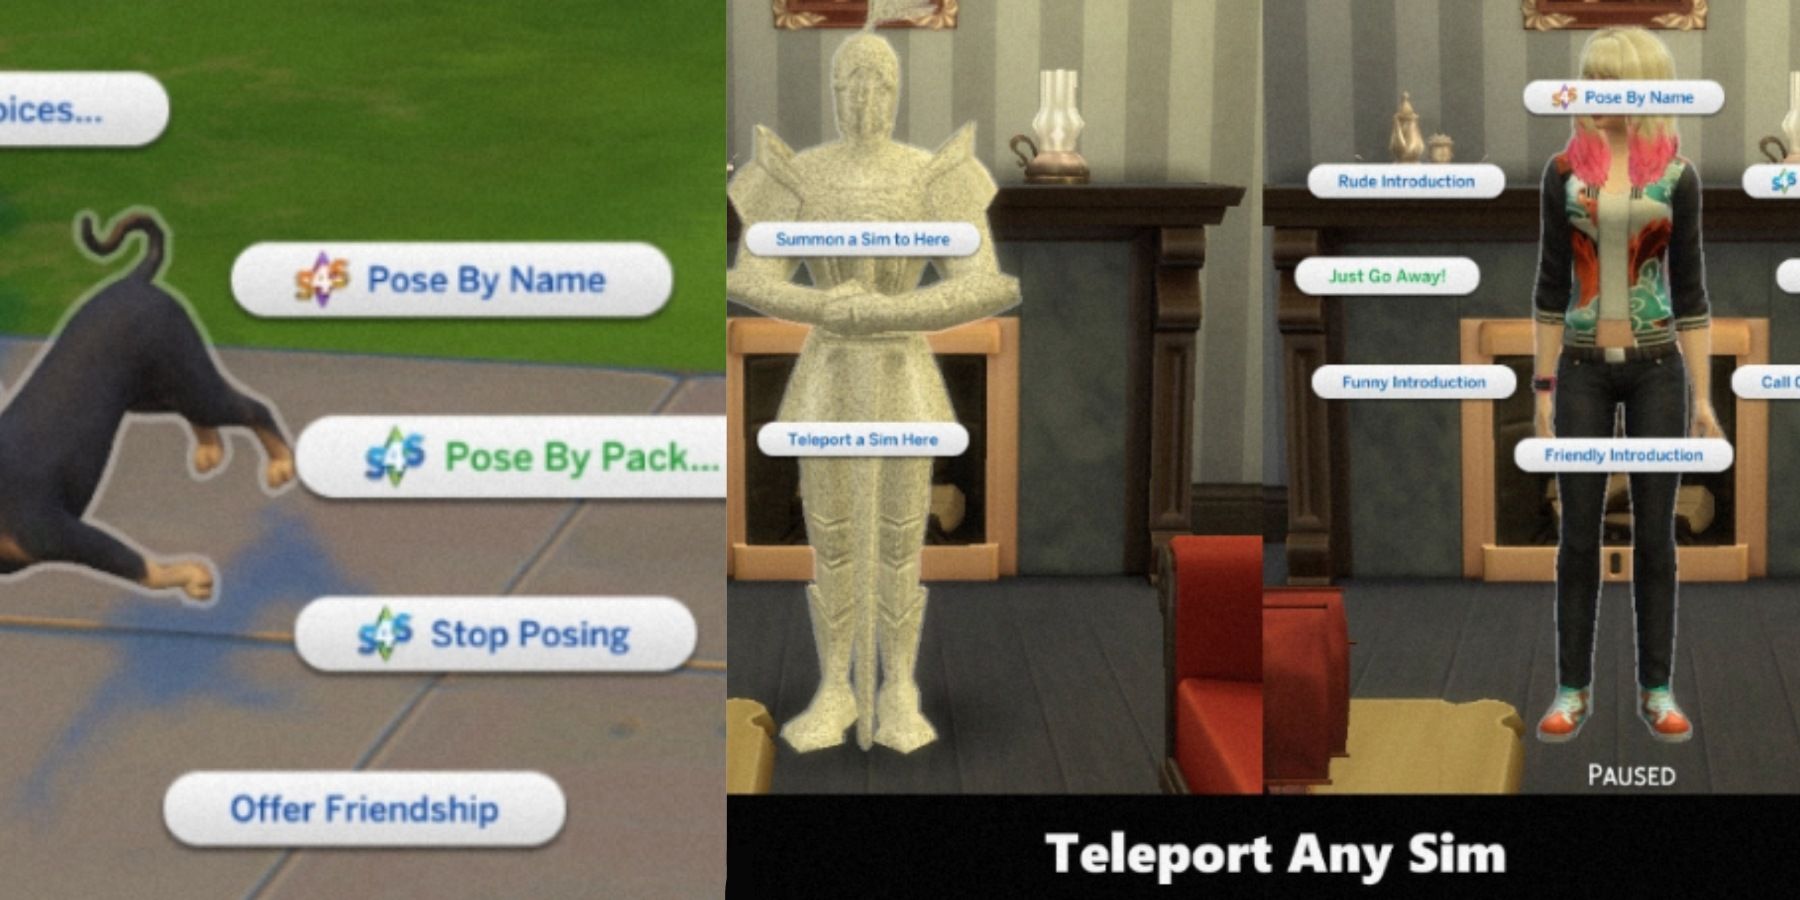 Andrew Pose Player won't show up in game. | Sims 4 Studio